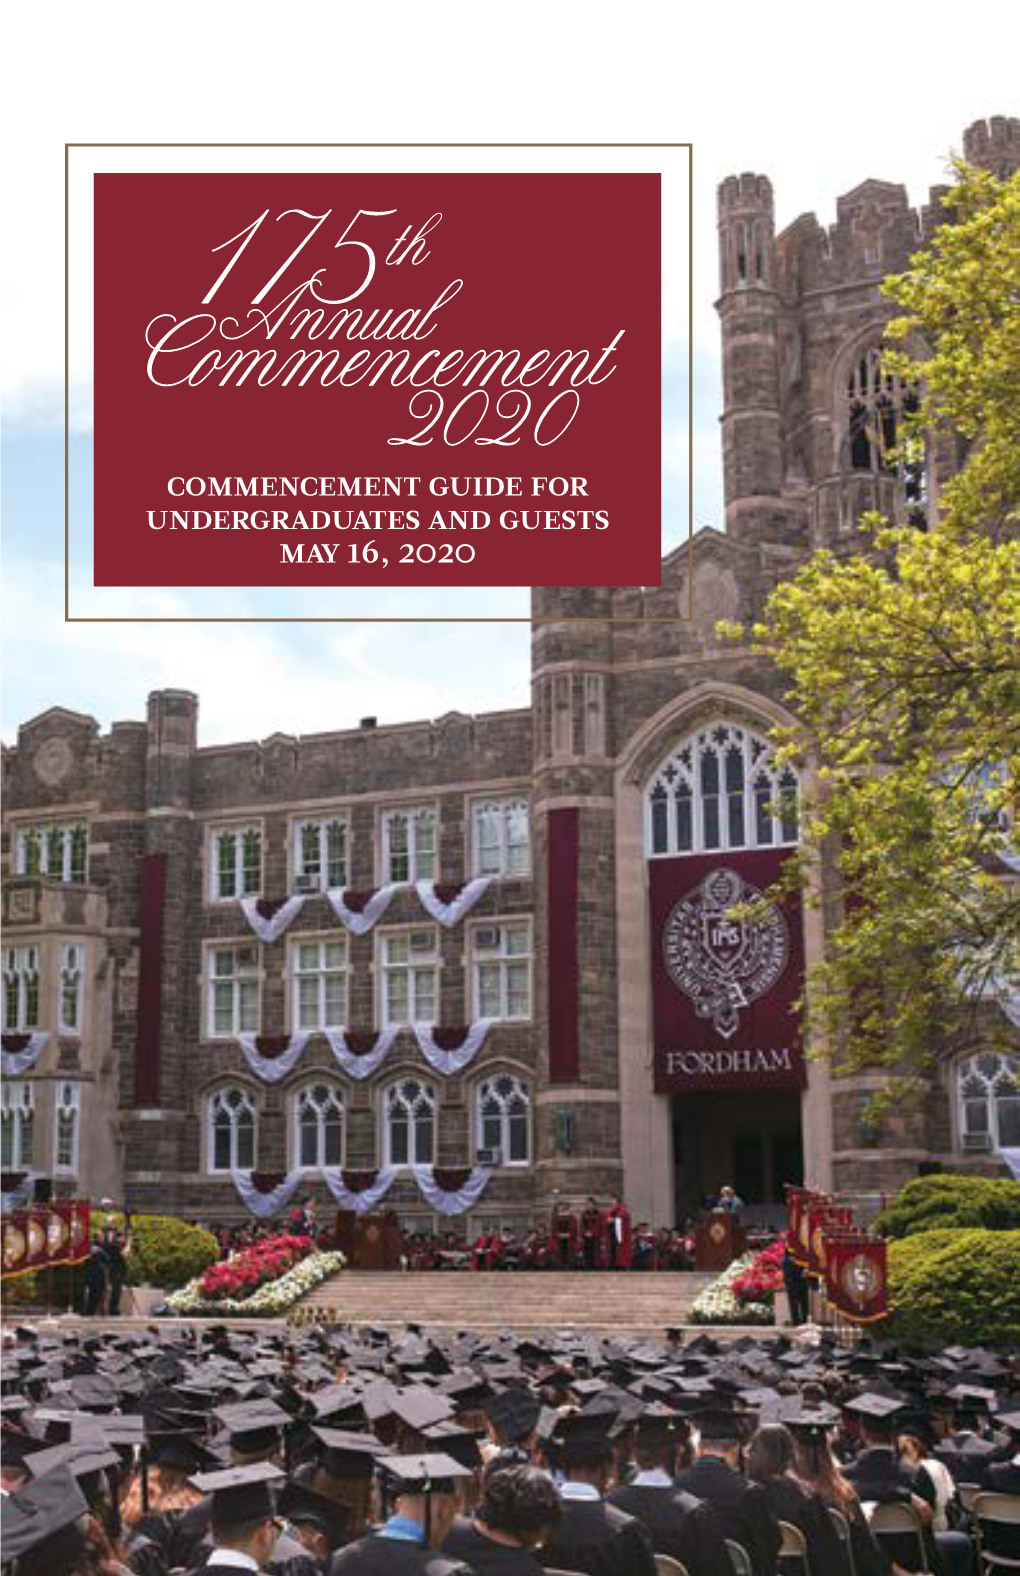 175Th Annual Commencement Guide for Undergraduates and Guests 2020